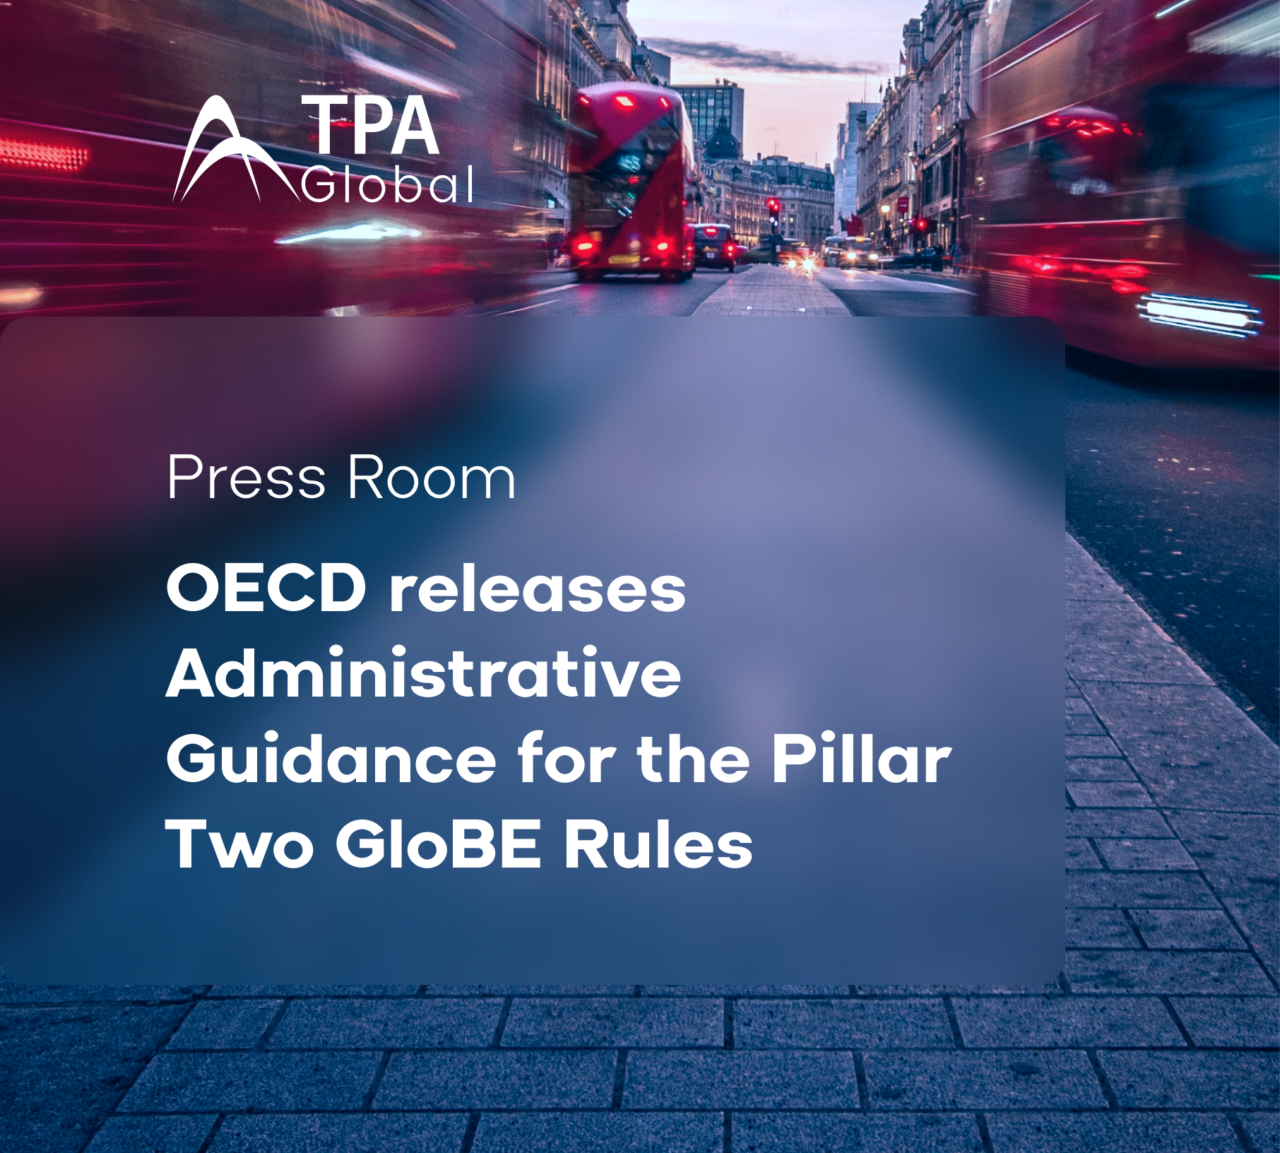 OECD releases Administrative Guidance for the Pillar Two GloBE Rules